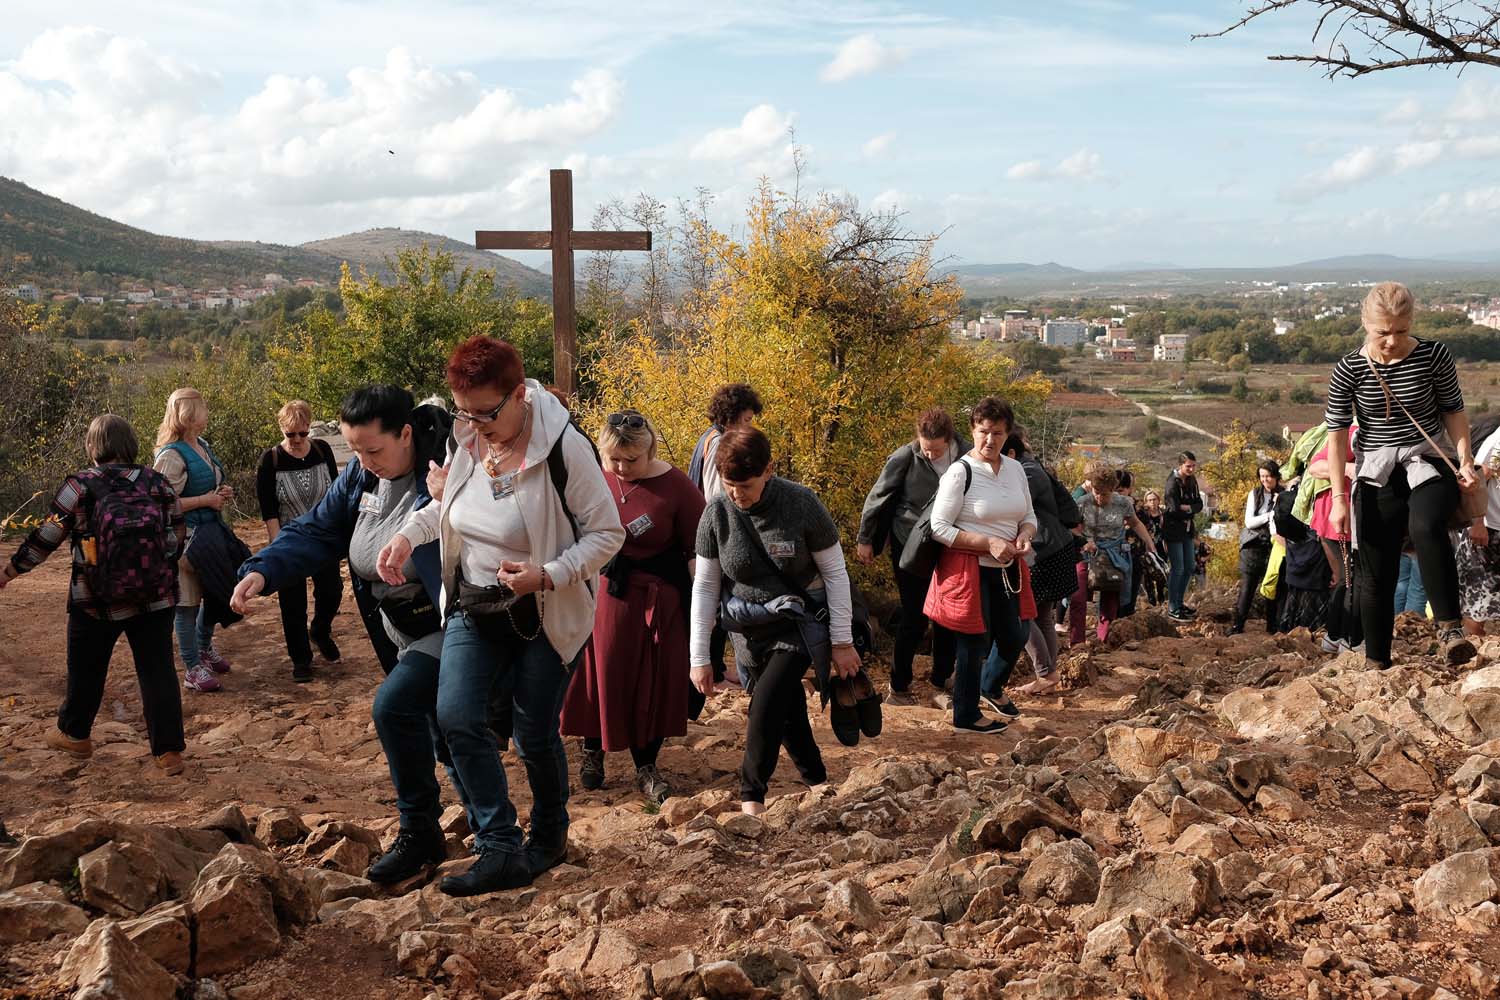 The path towards Apparition Hill in Medjugorje, November 2019.